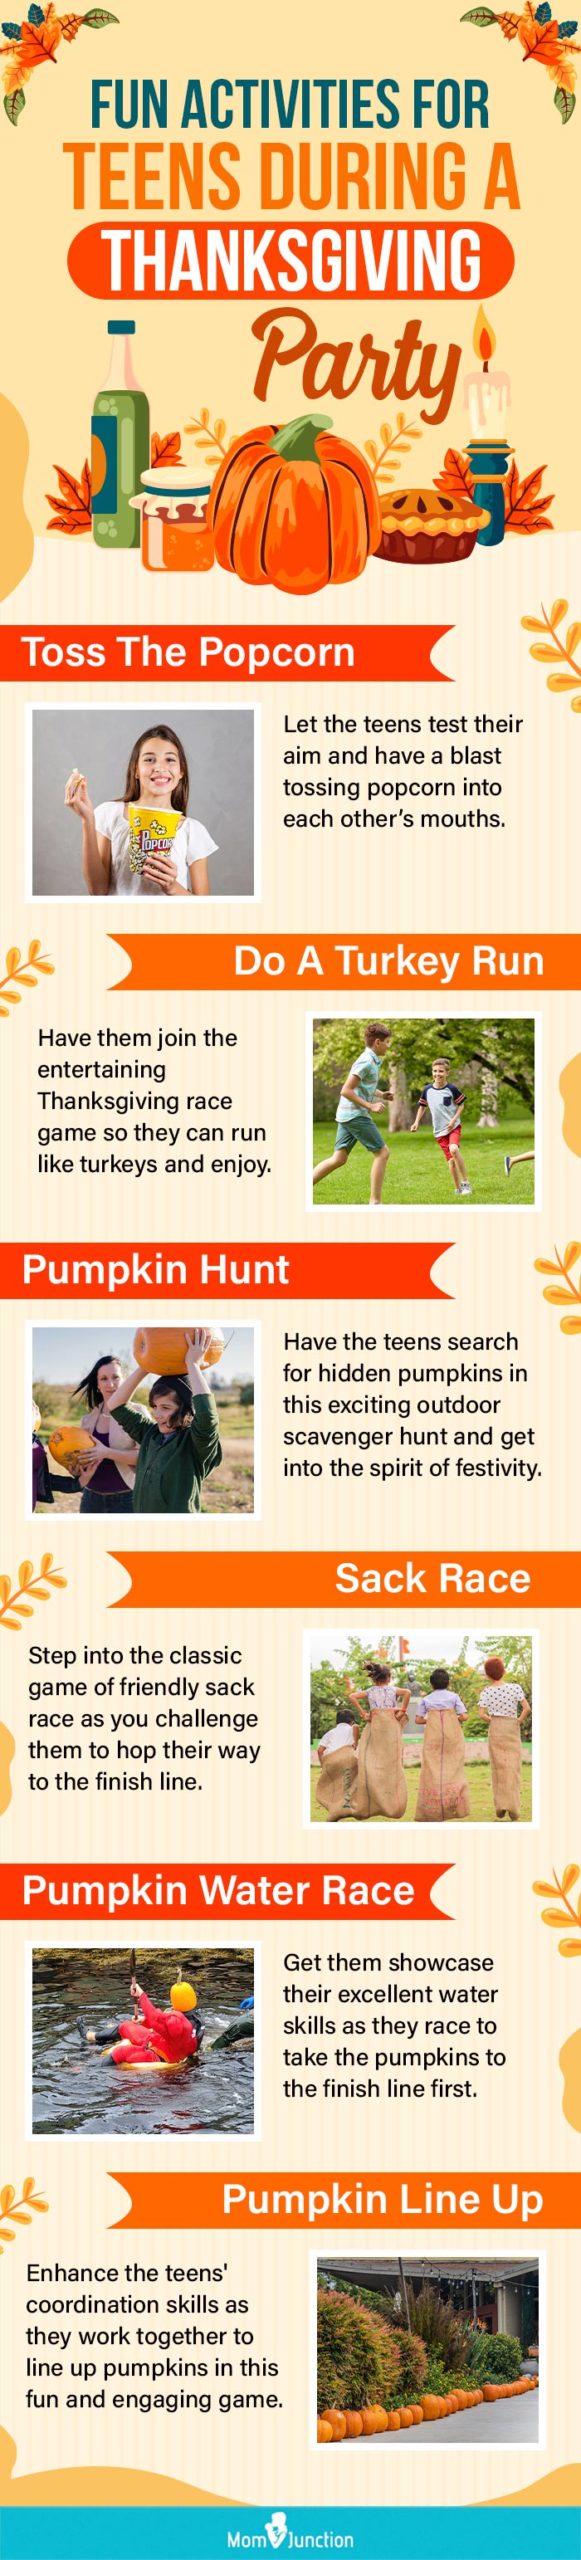 fun activities for teens during a thanksgiving party (infographic)